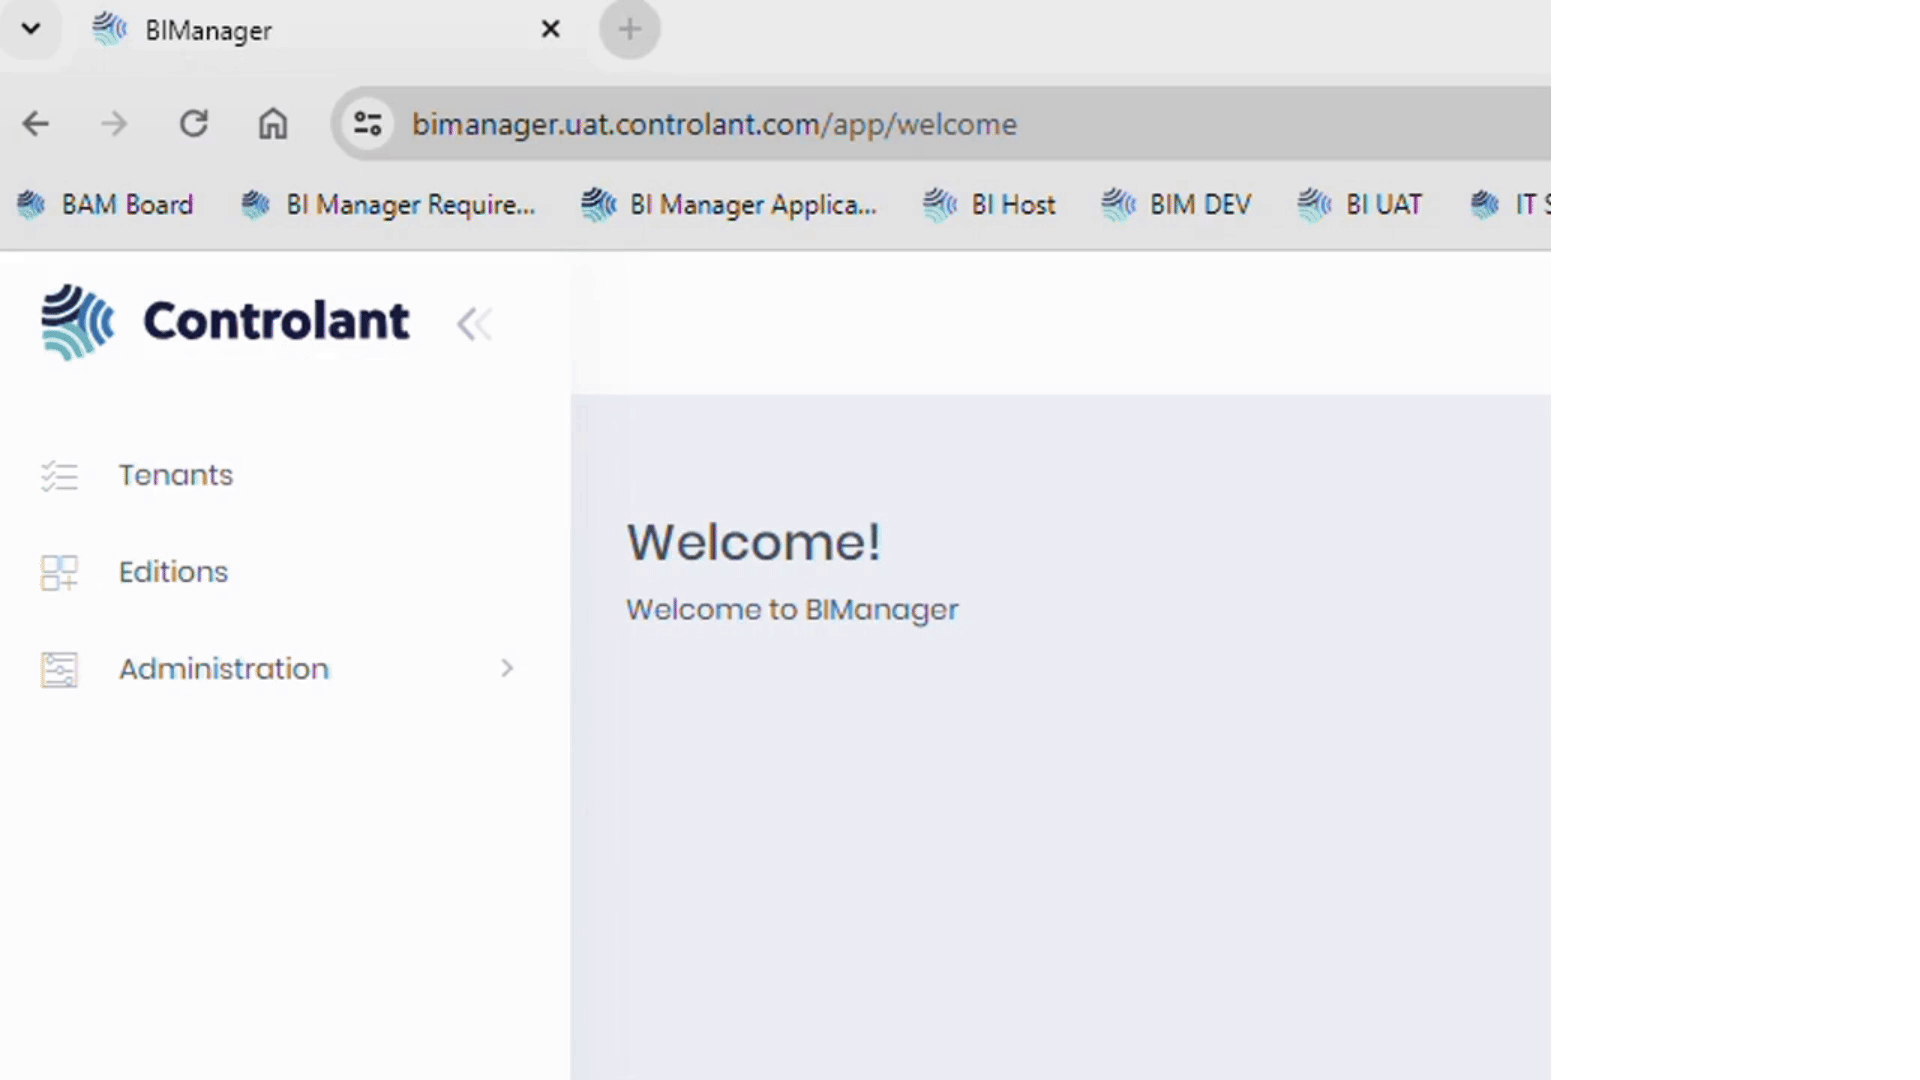 Before, clicking the logo would open the BI Manager in a new tab